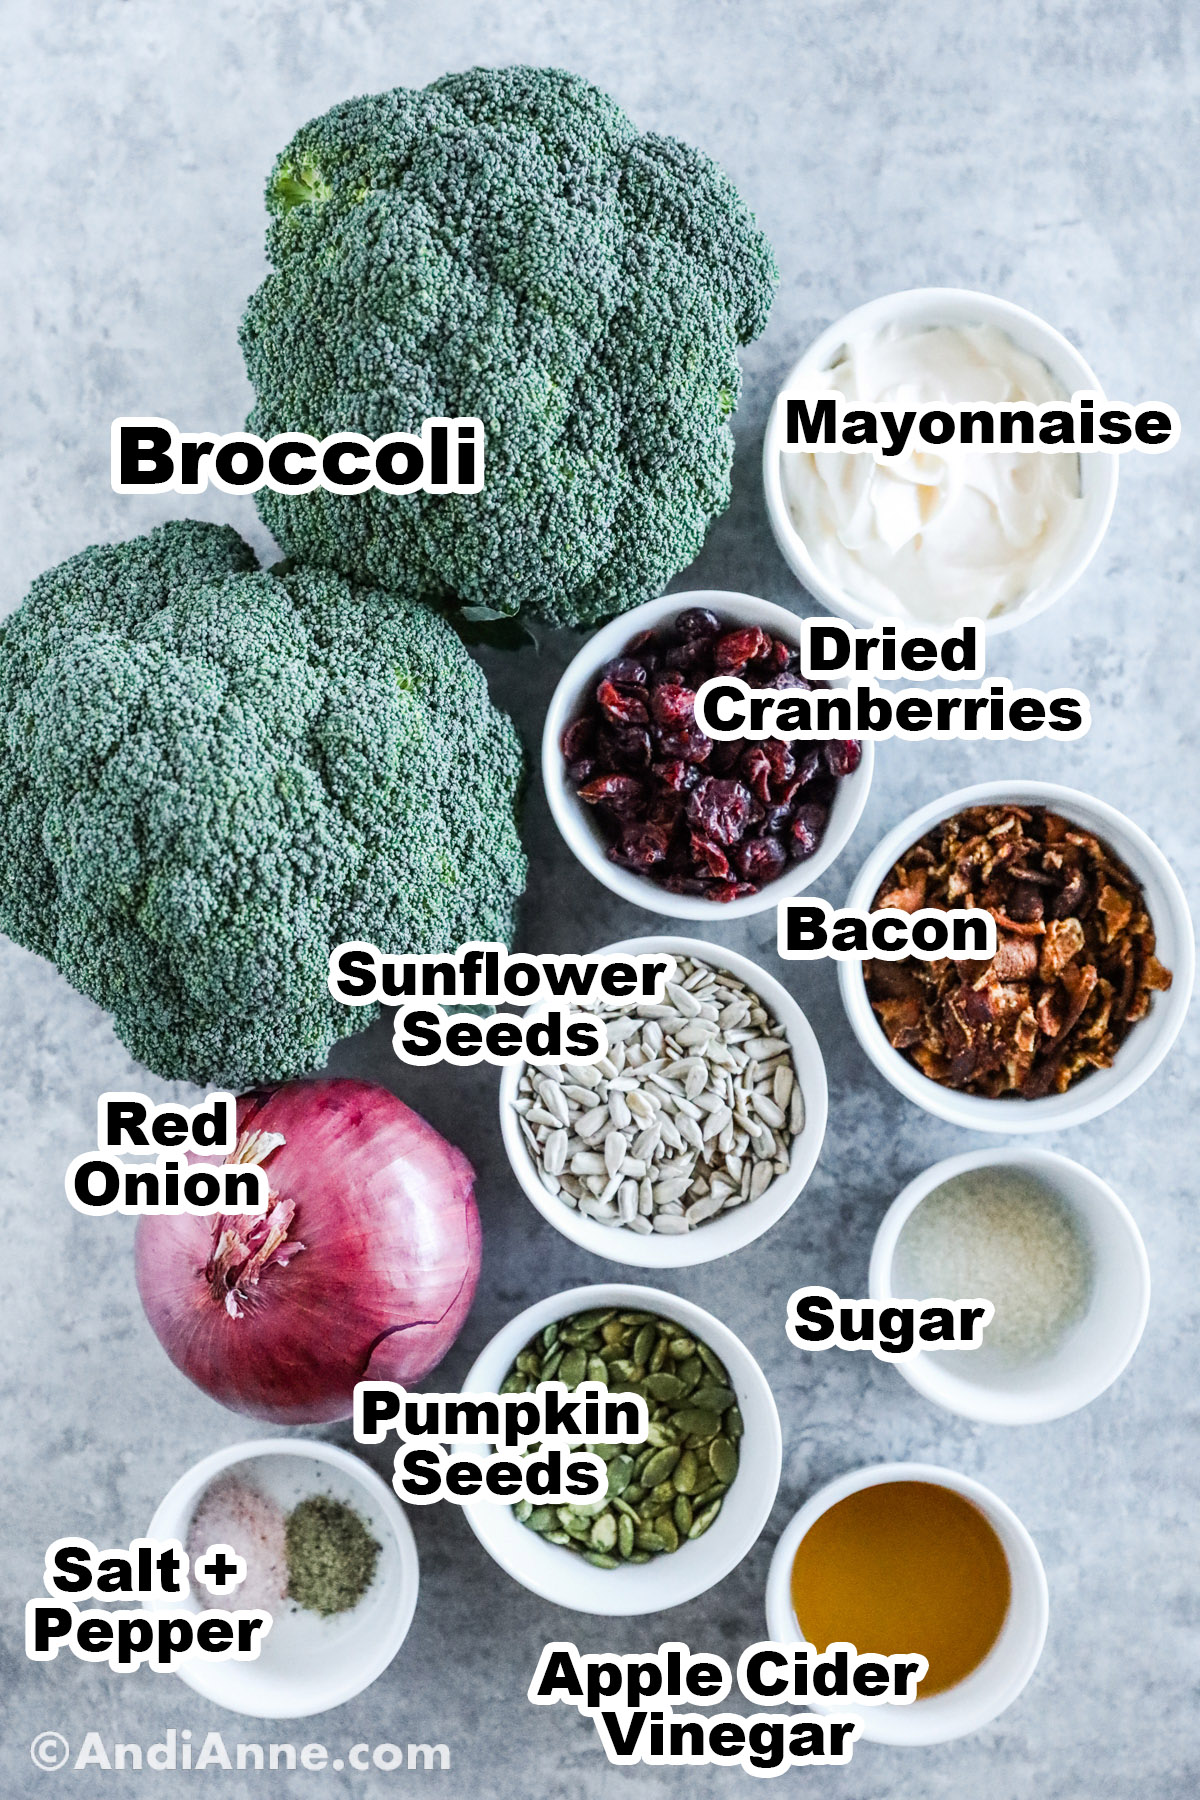 Ingredients to make the recipe including broccoli, bowls of mayonnaise, dried cranberries, bacon, sunflower seeds, sugar, pumpkin seeds, apple cider vinegar and onion.